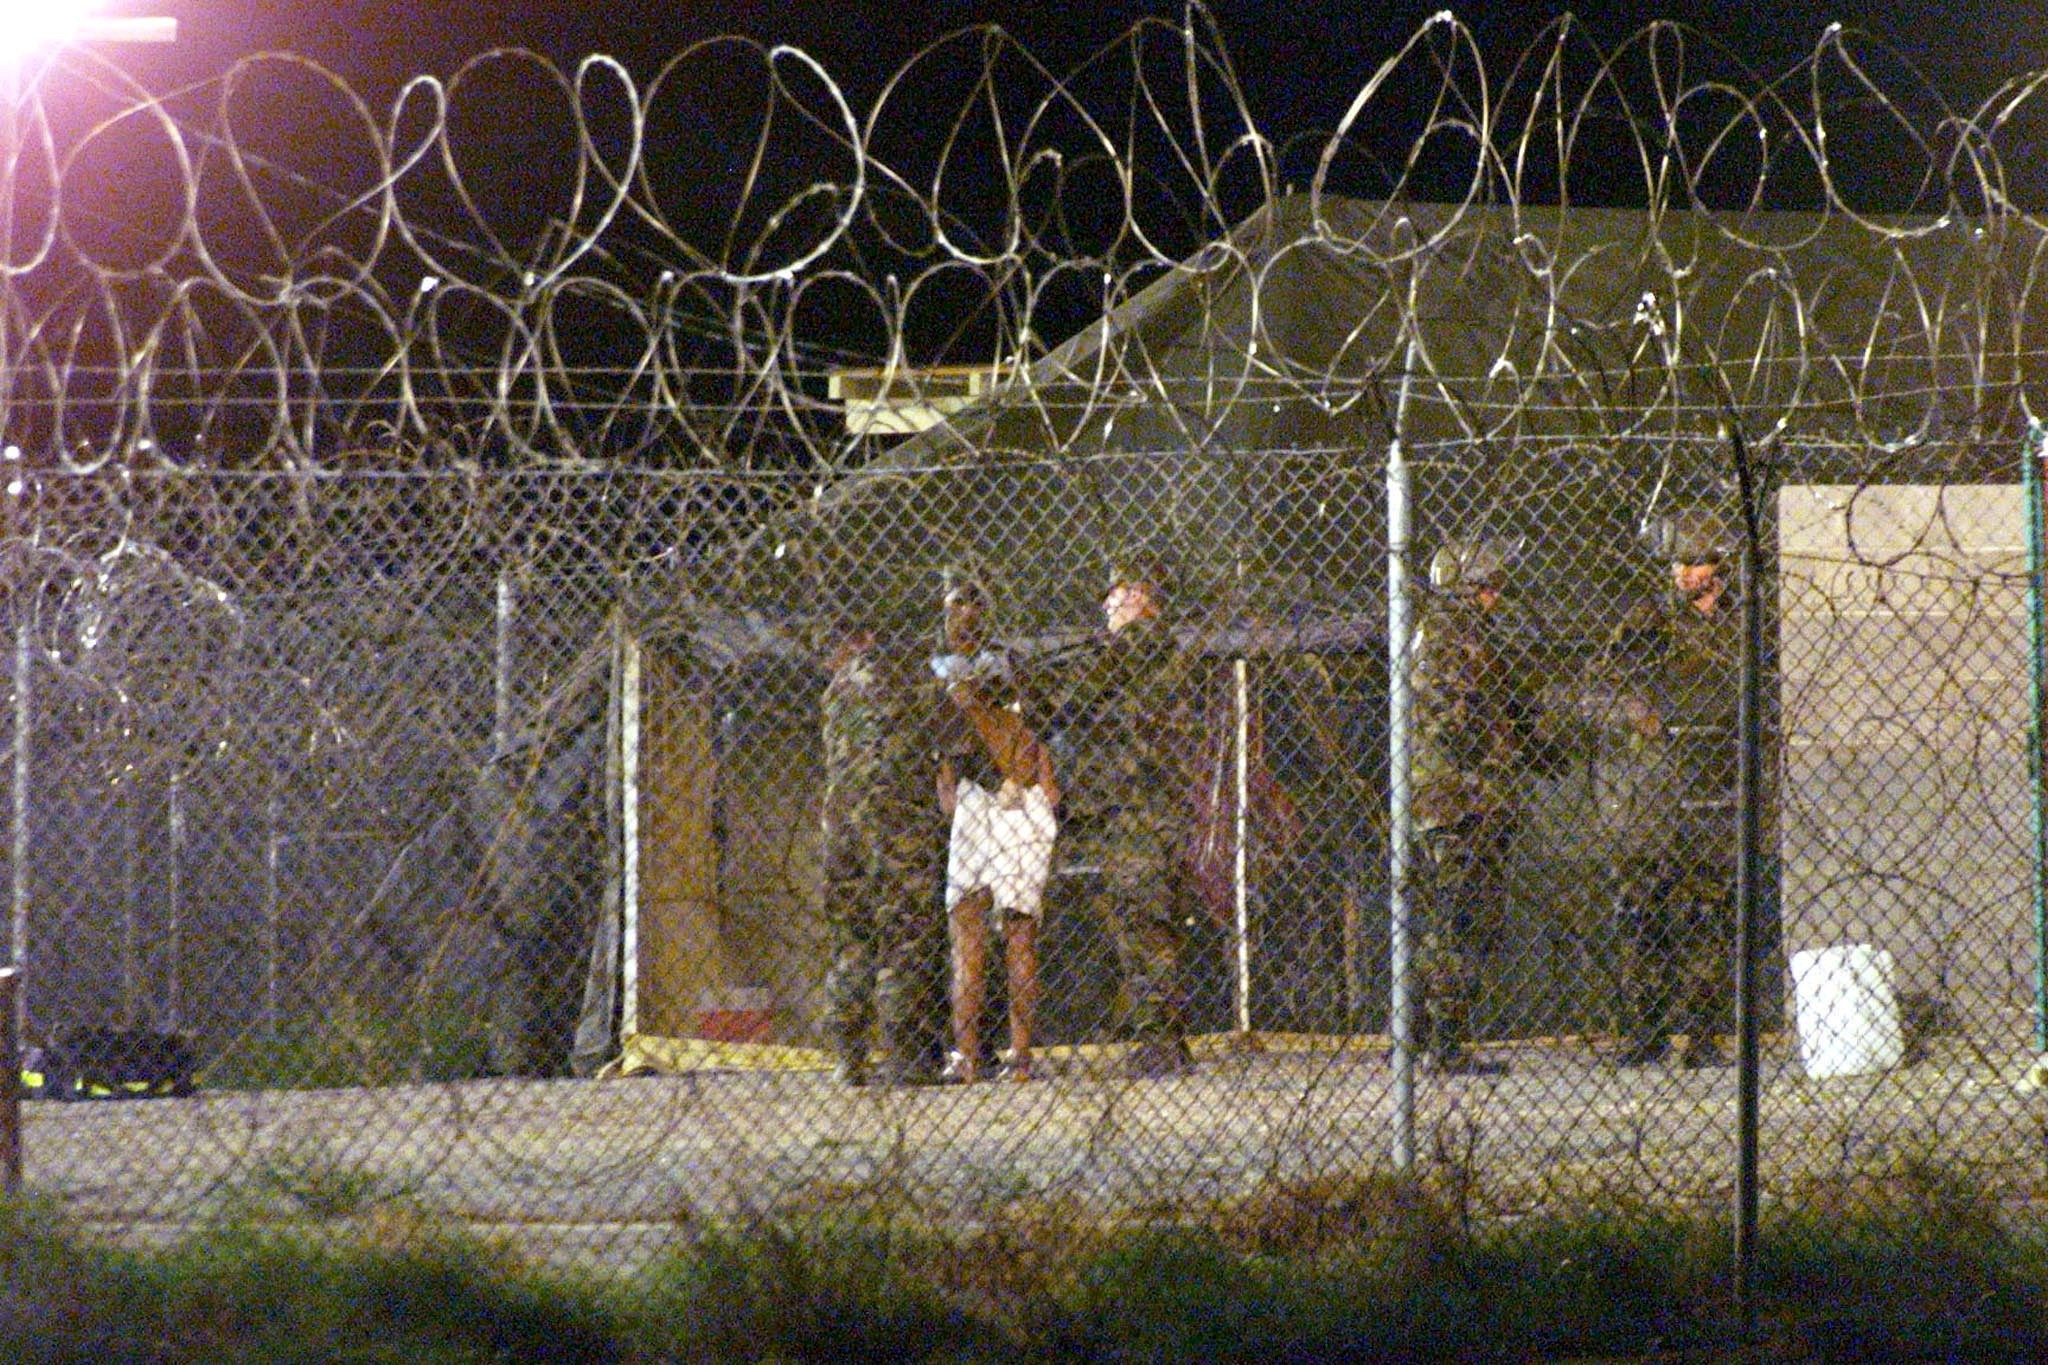 Marines at Camp X-Ray at the Naval Base at Guantanamo Bay, escort a newly arriving detainee into a processing tent after being showered in 2002. Photo: Reuters